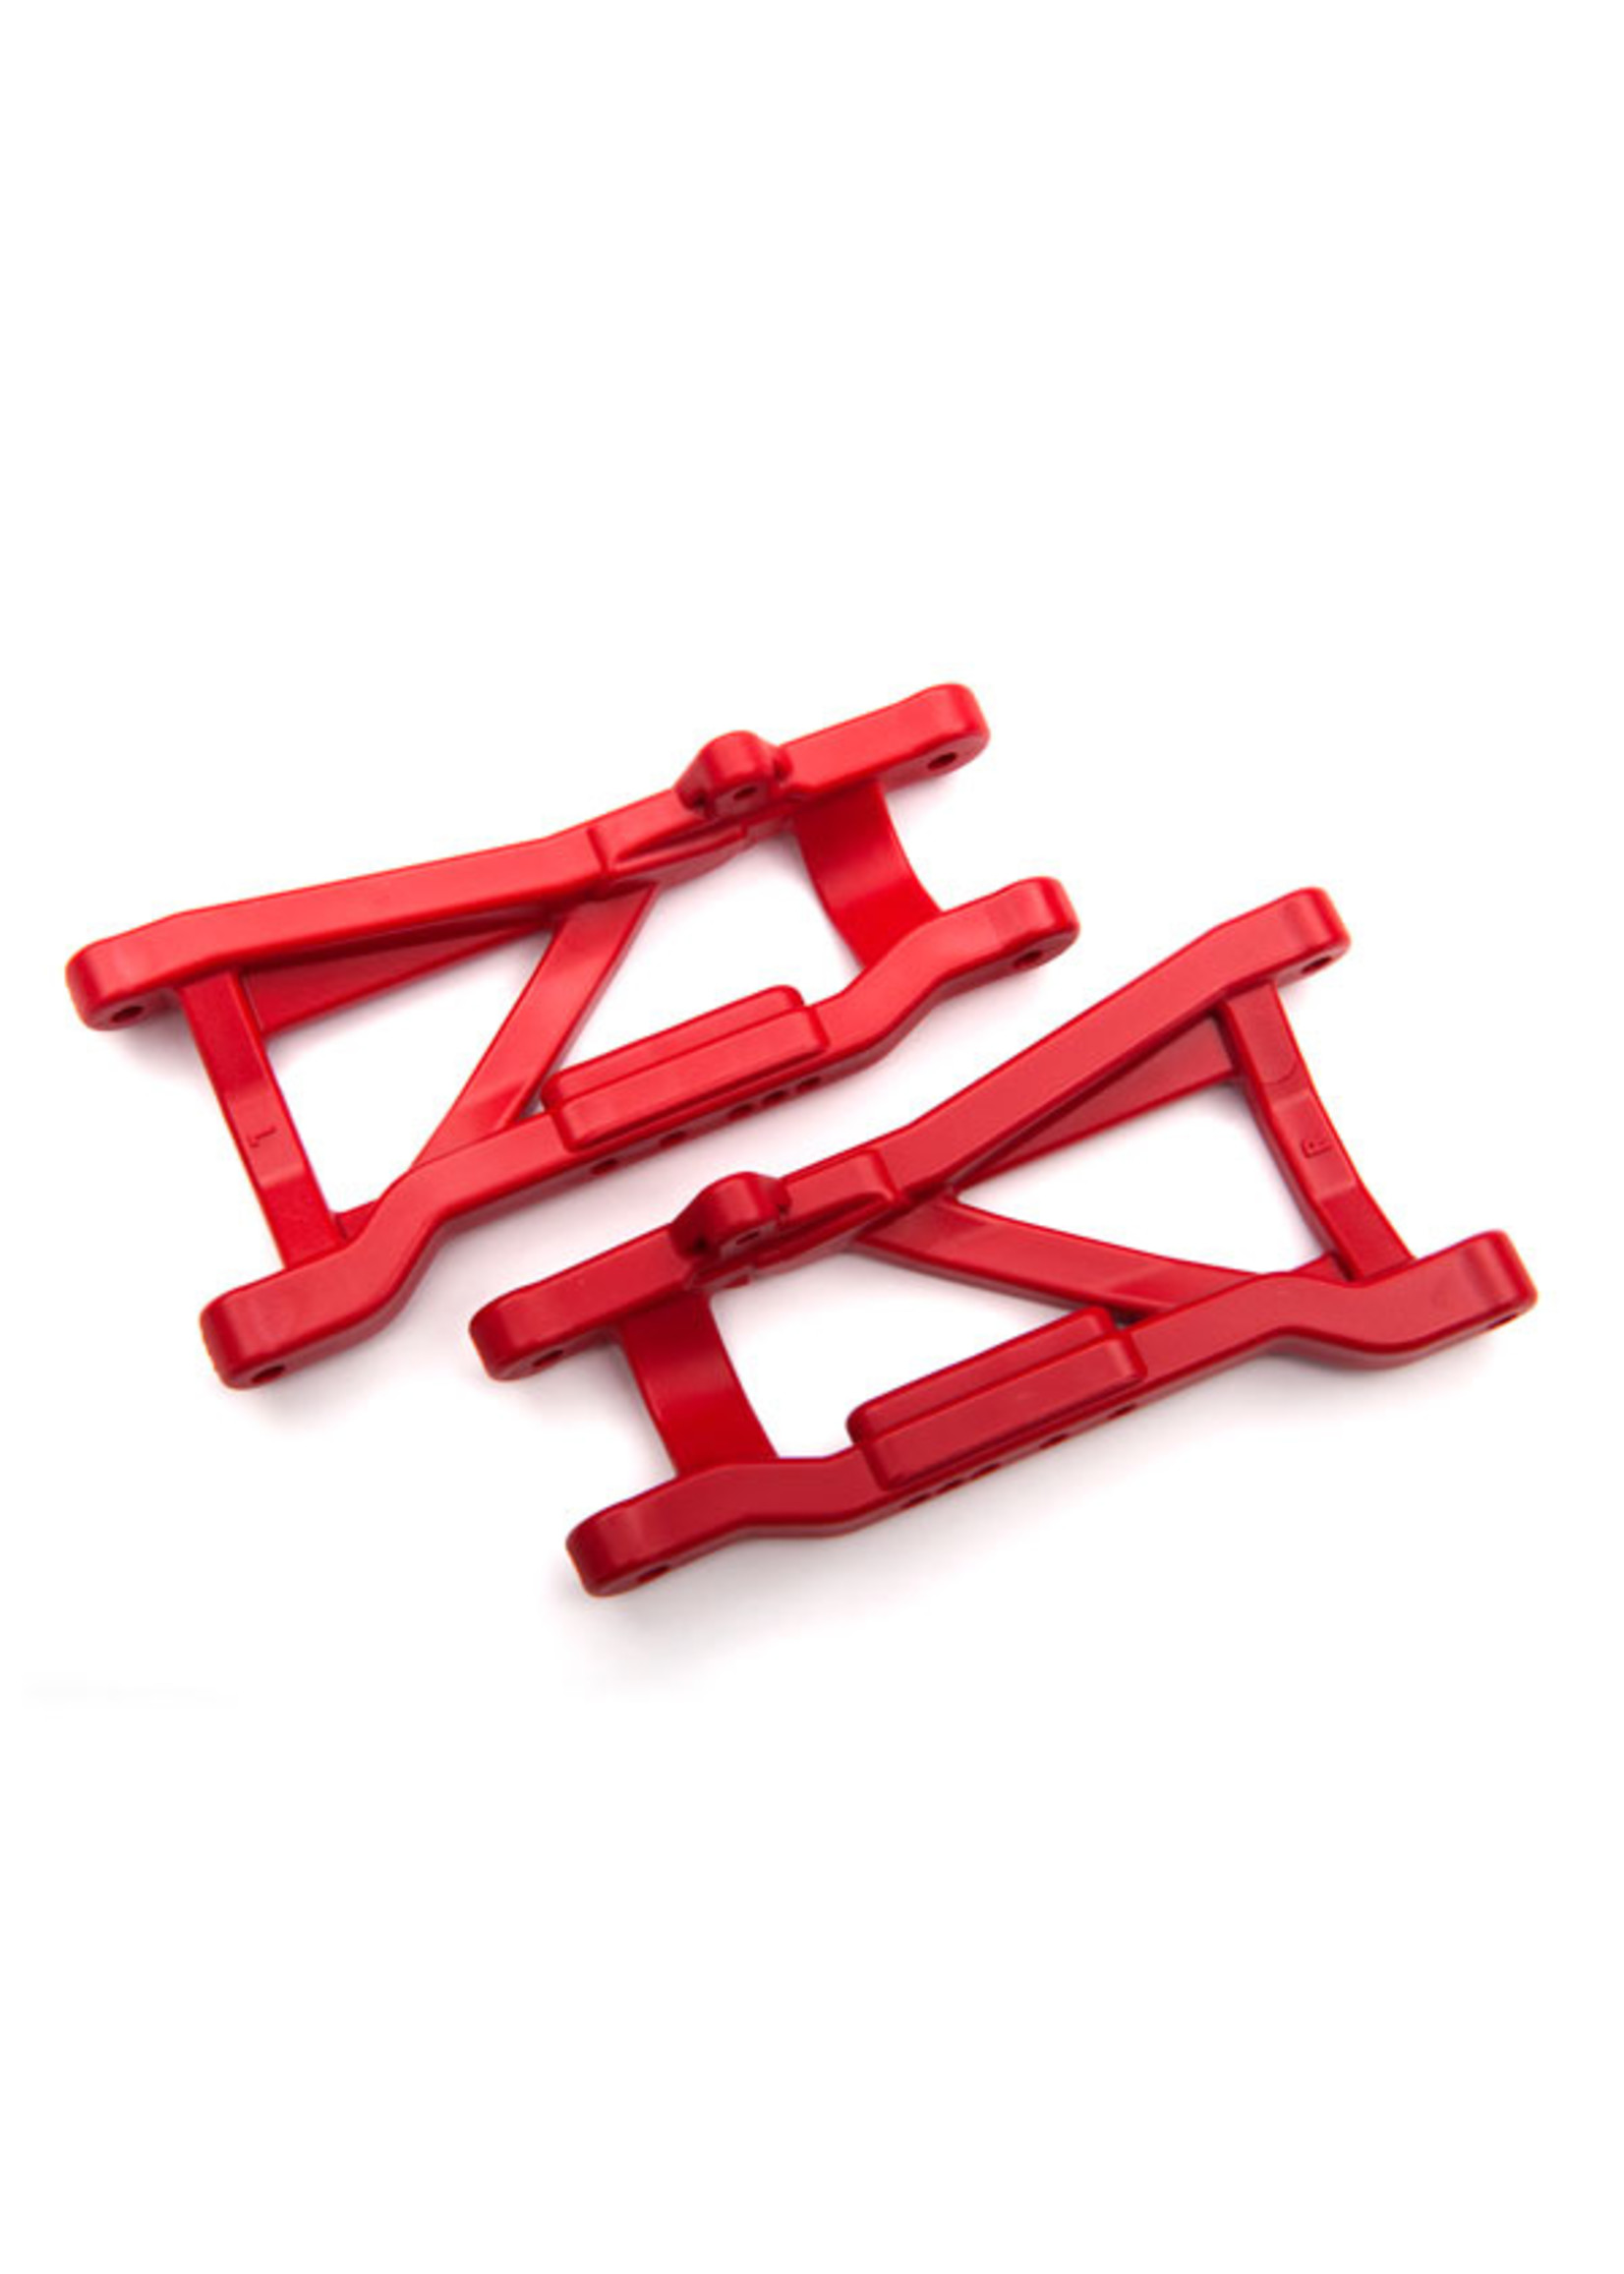 Traxxas 2555R - Heavy Duty Rear Suspension Arms - Red